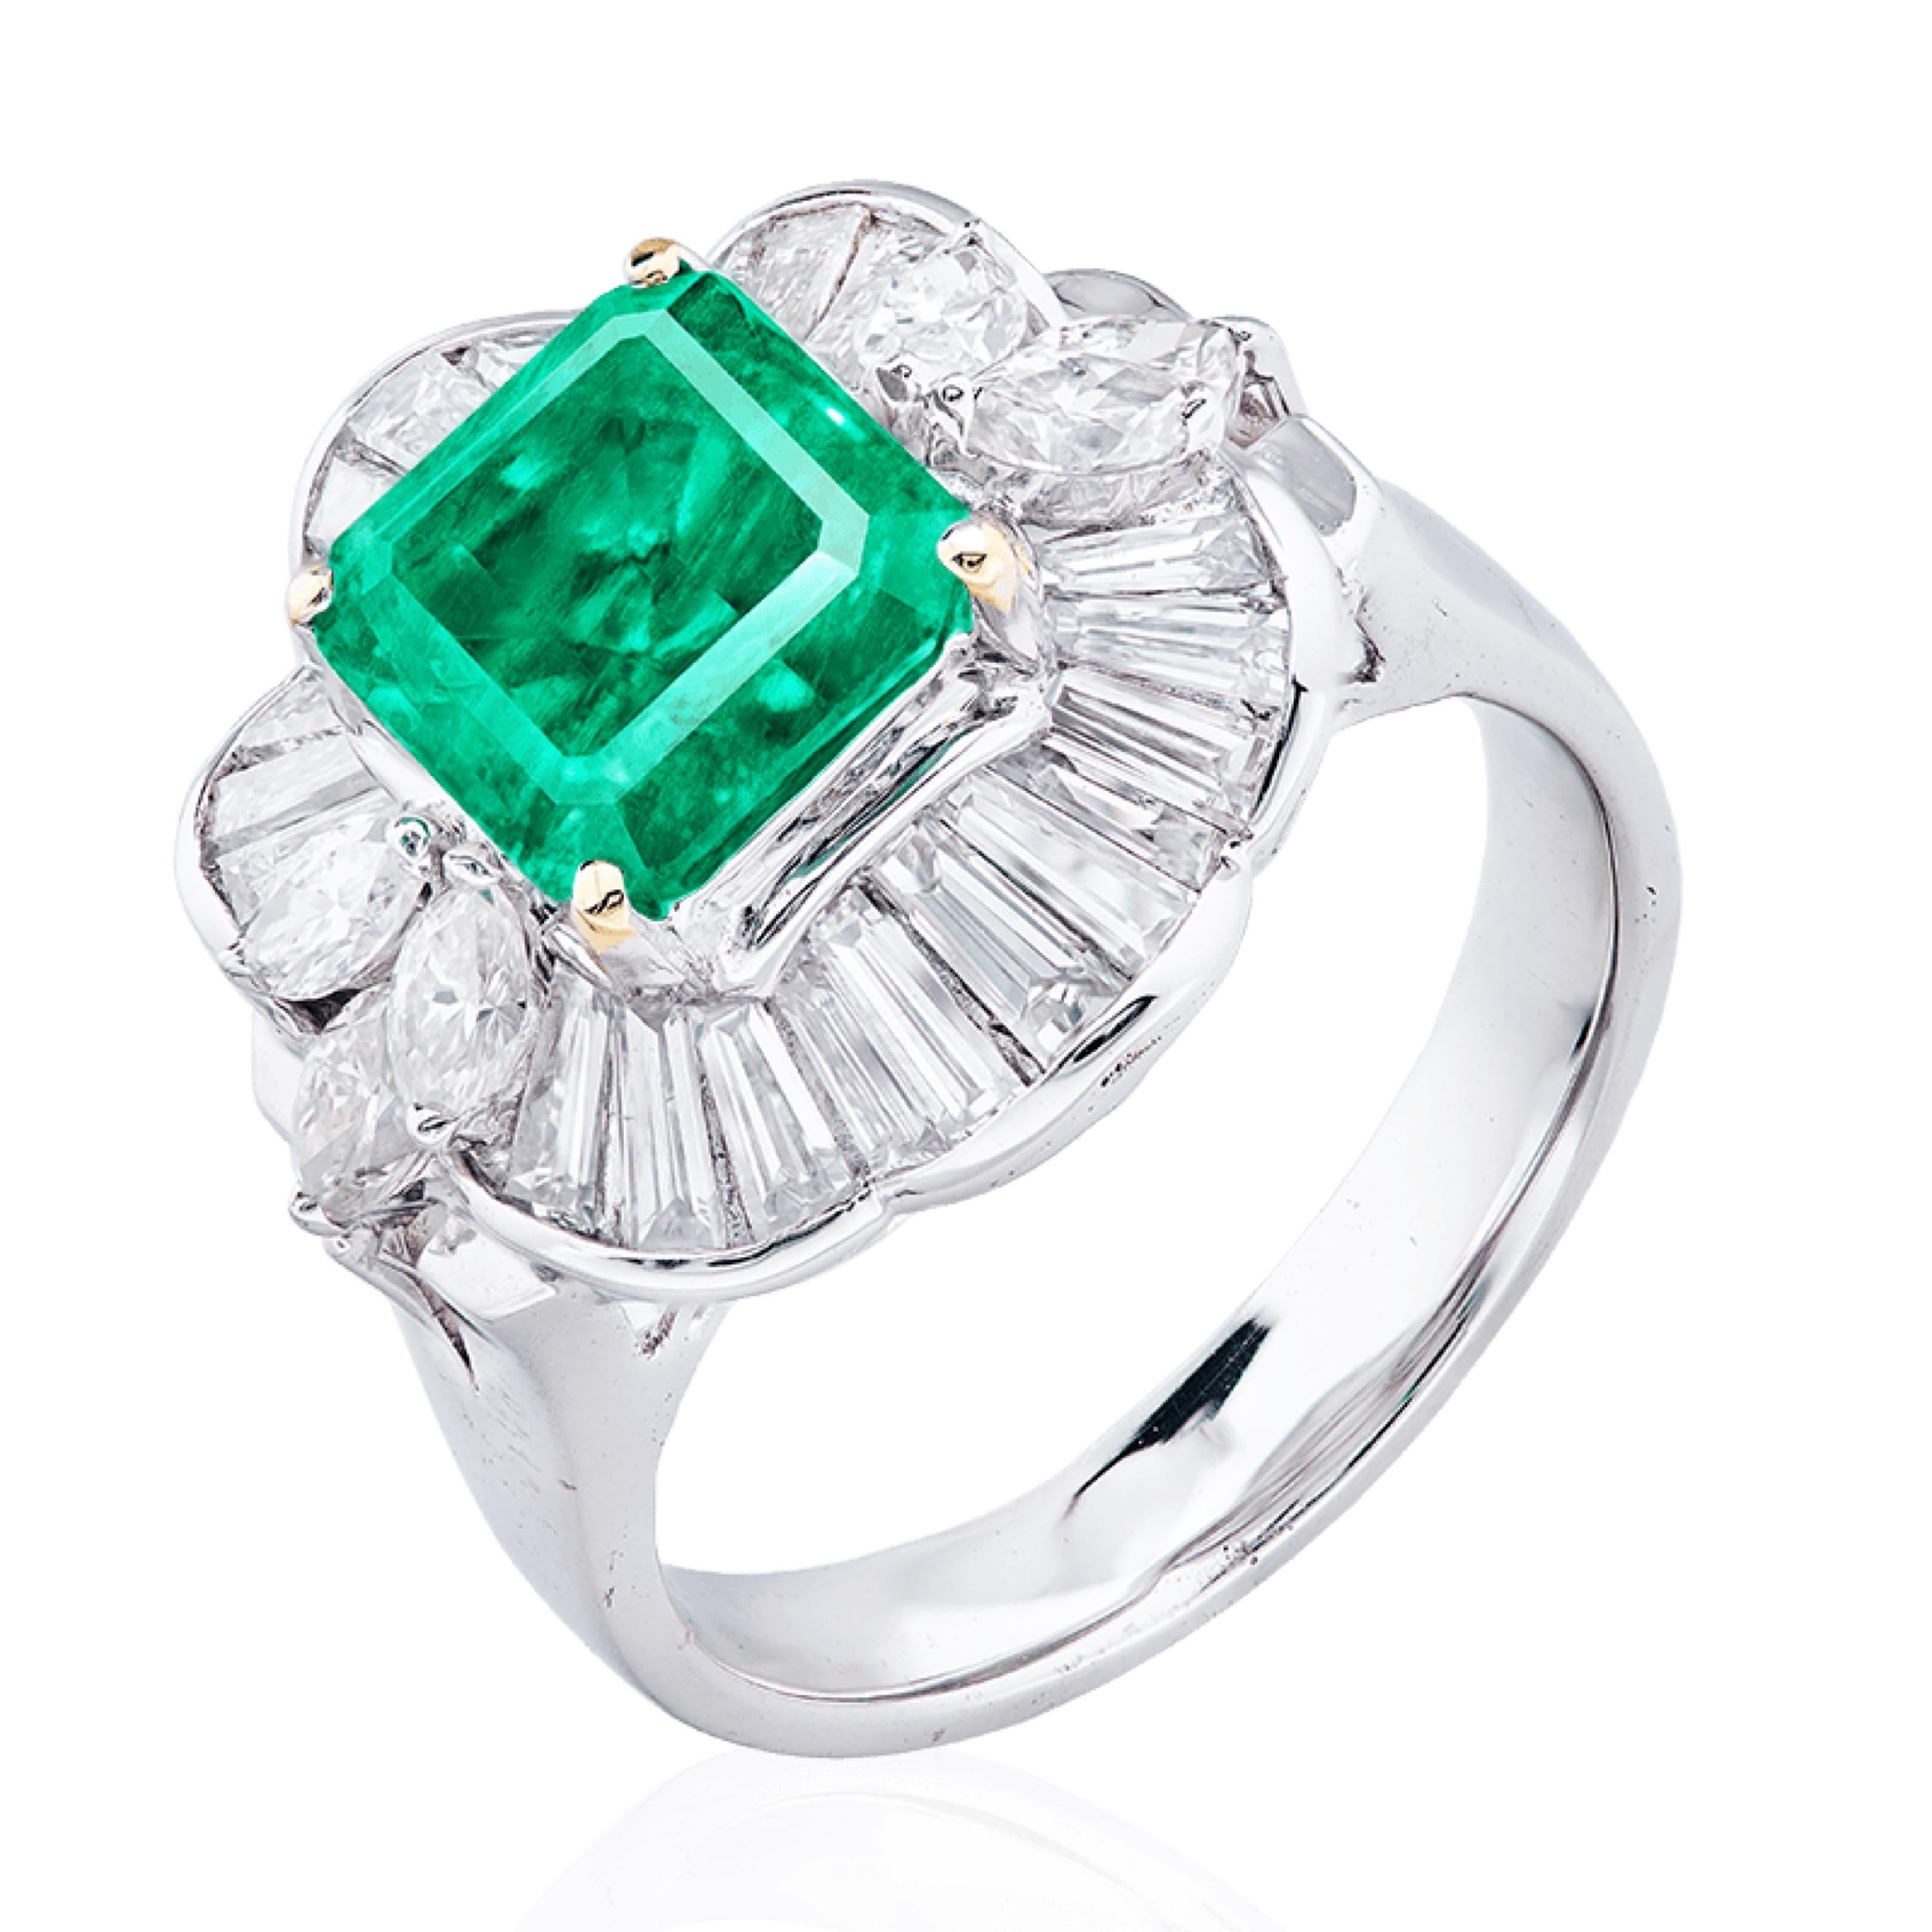 From the Emilio Jewelry Vault in New York City,

Main stone: 2.35 carats Vivid Green Cut cornered rectangle. According to the certificate this emerald is insignificant in oil making it a very rare emerald as most emeralds are minor to moderate